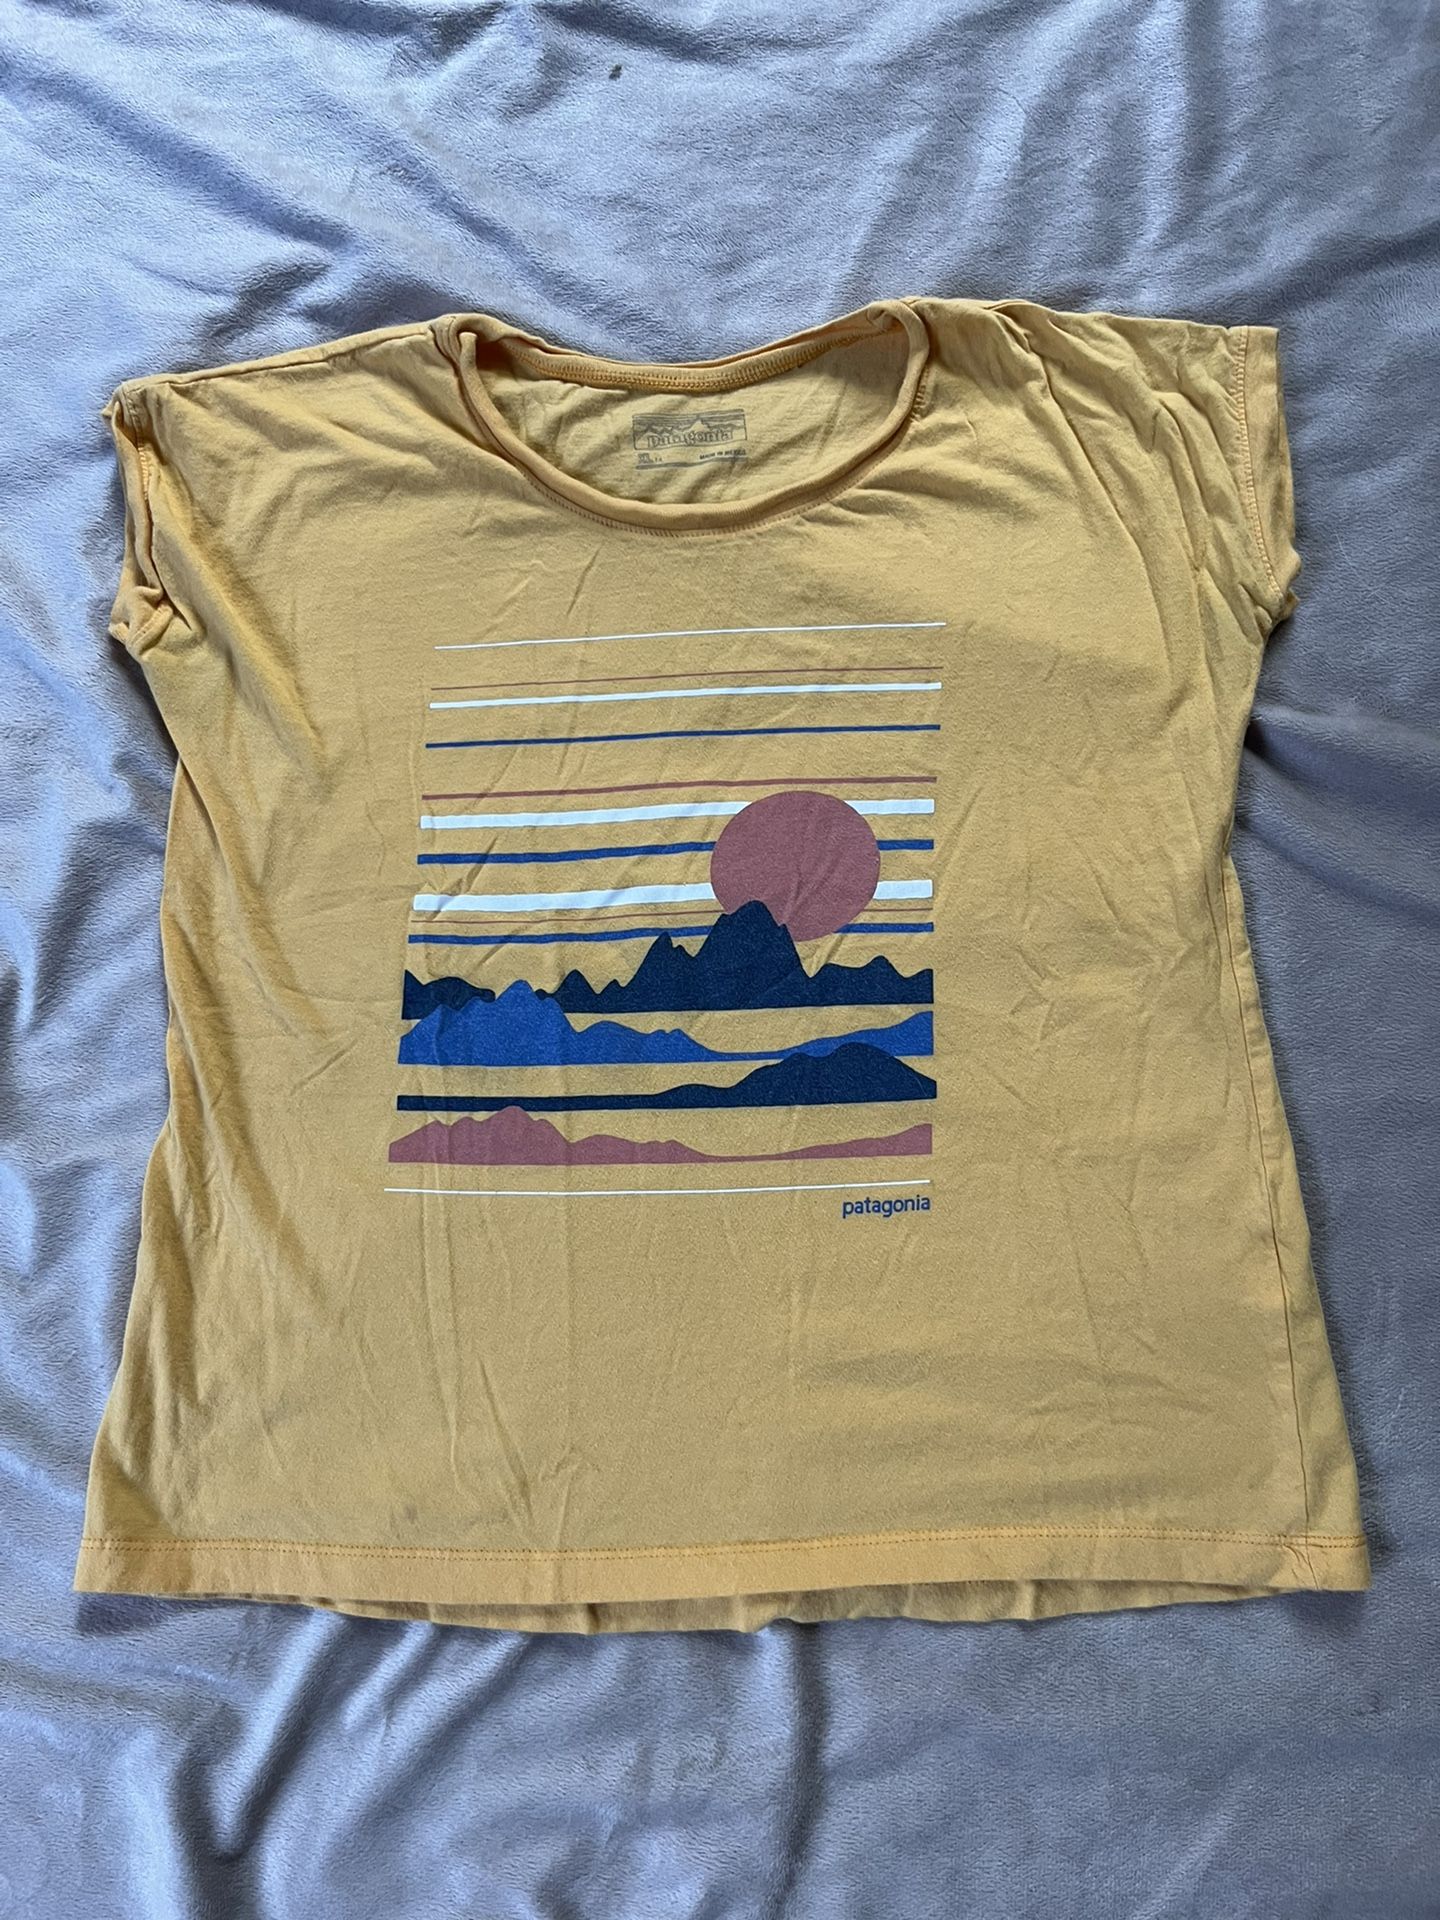 Patagonia Kids Yellow Sunshine in the Mountains T-Shirt: Size X-Large (14).